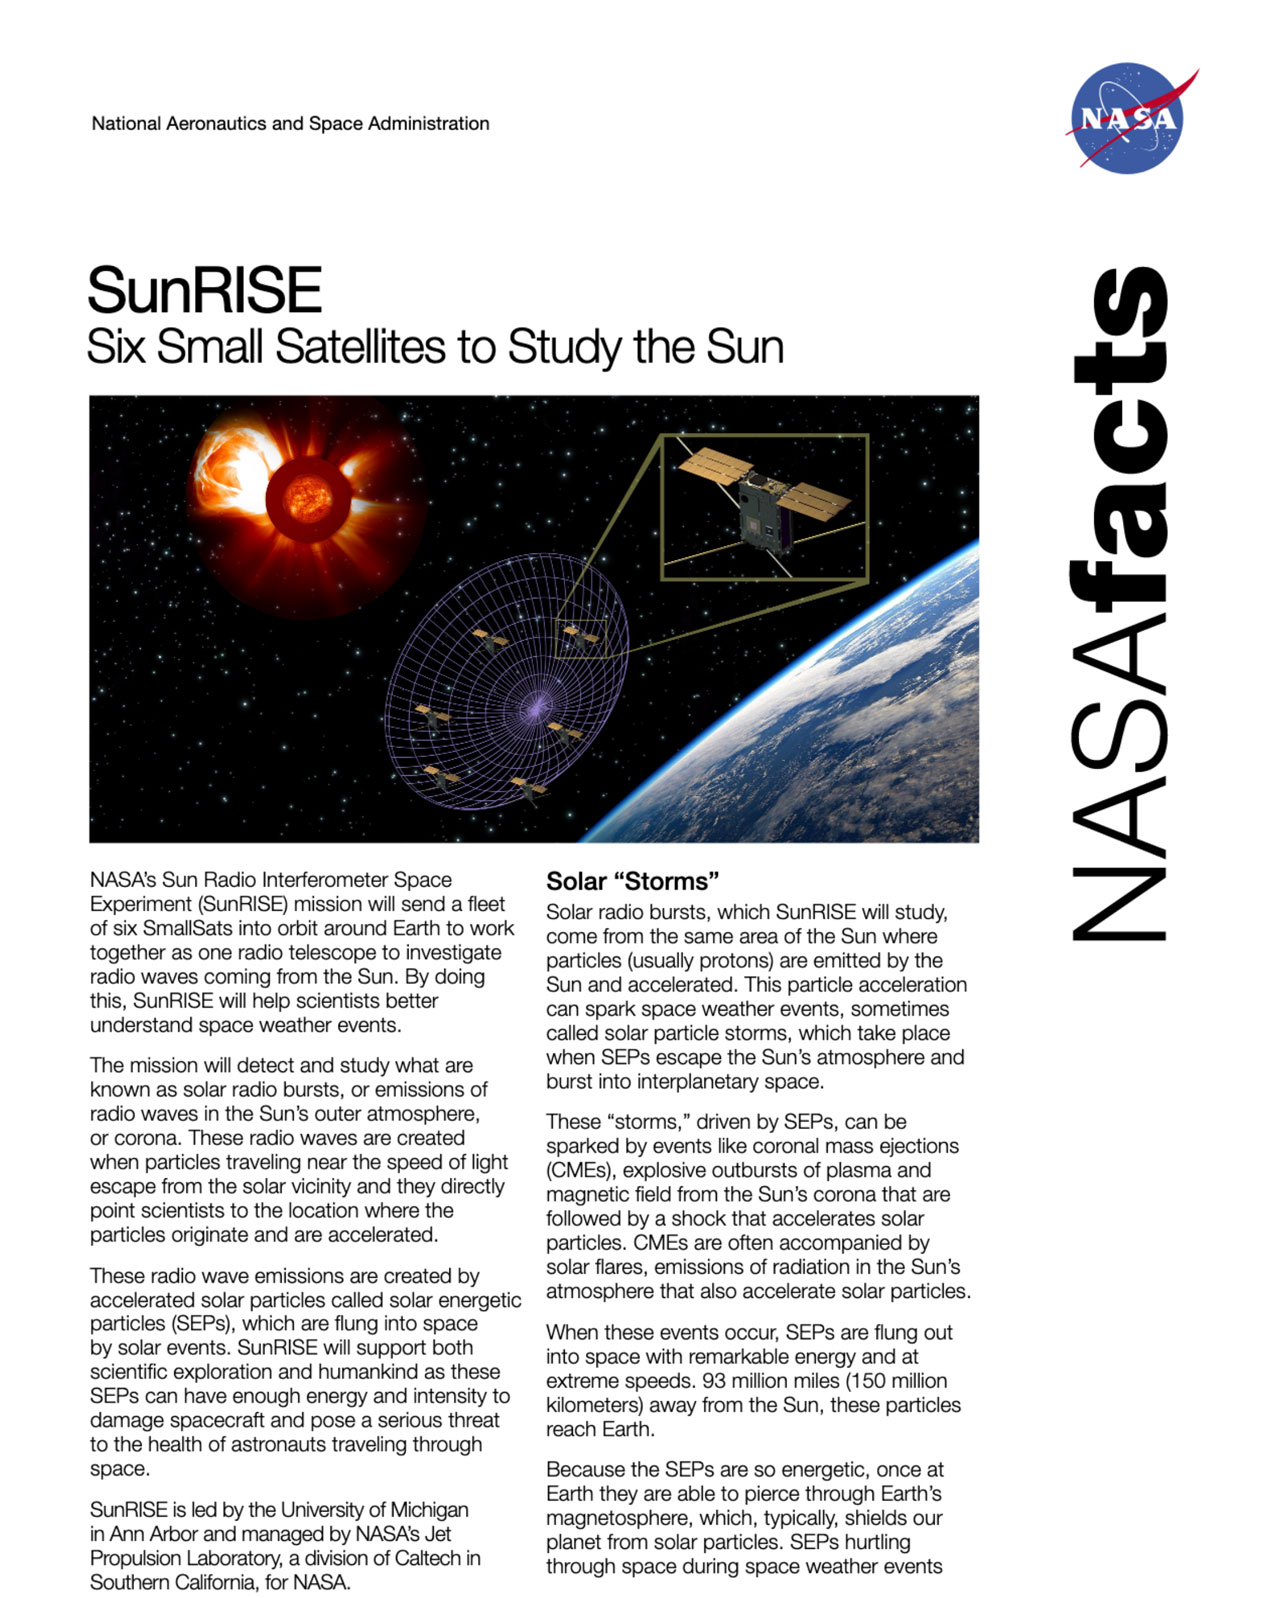 This printable fact sheet describes the SunRISE mission in detail.